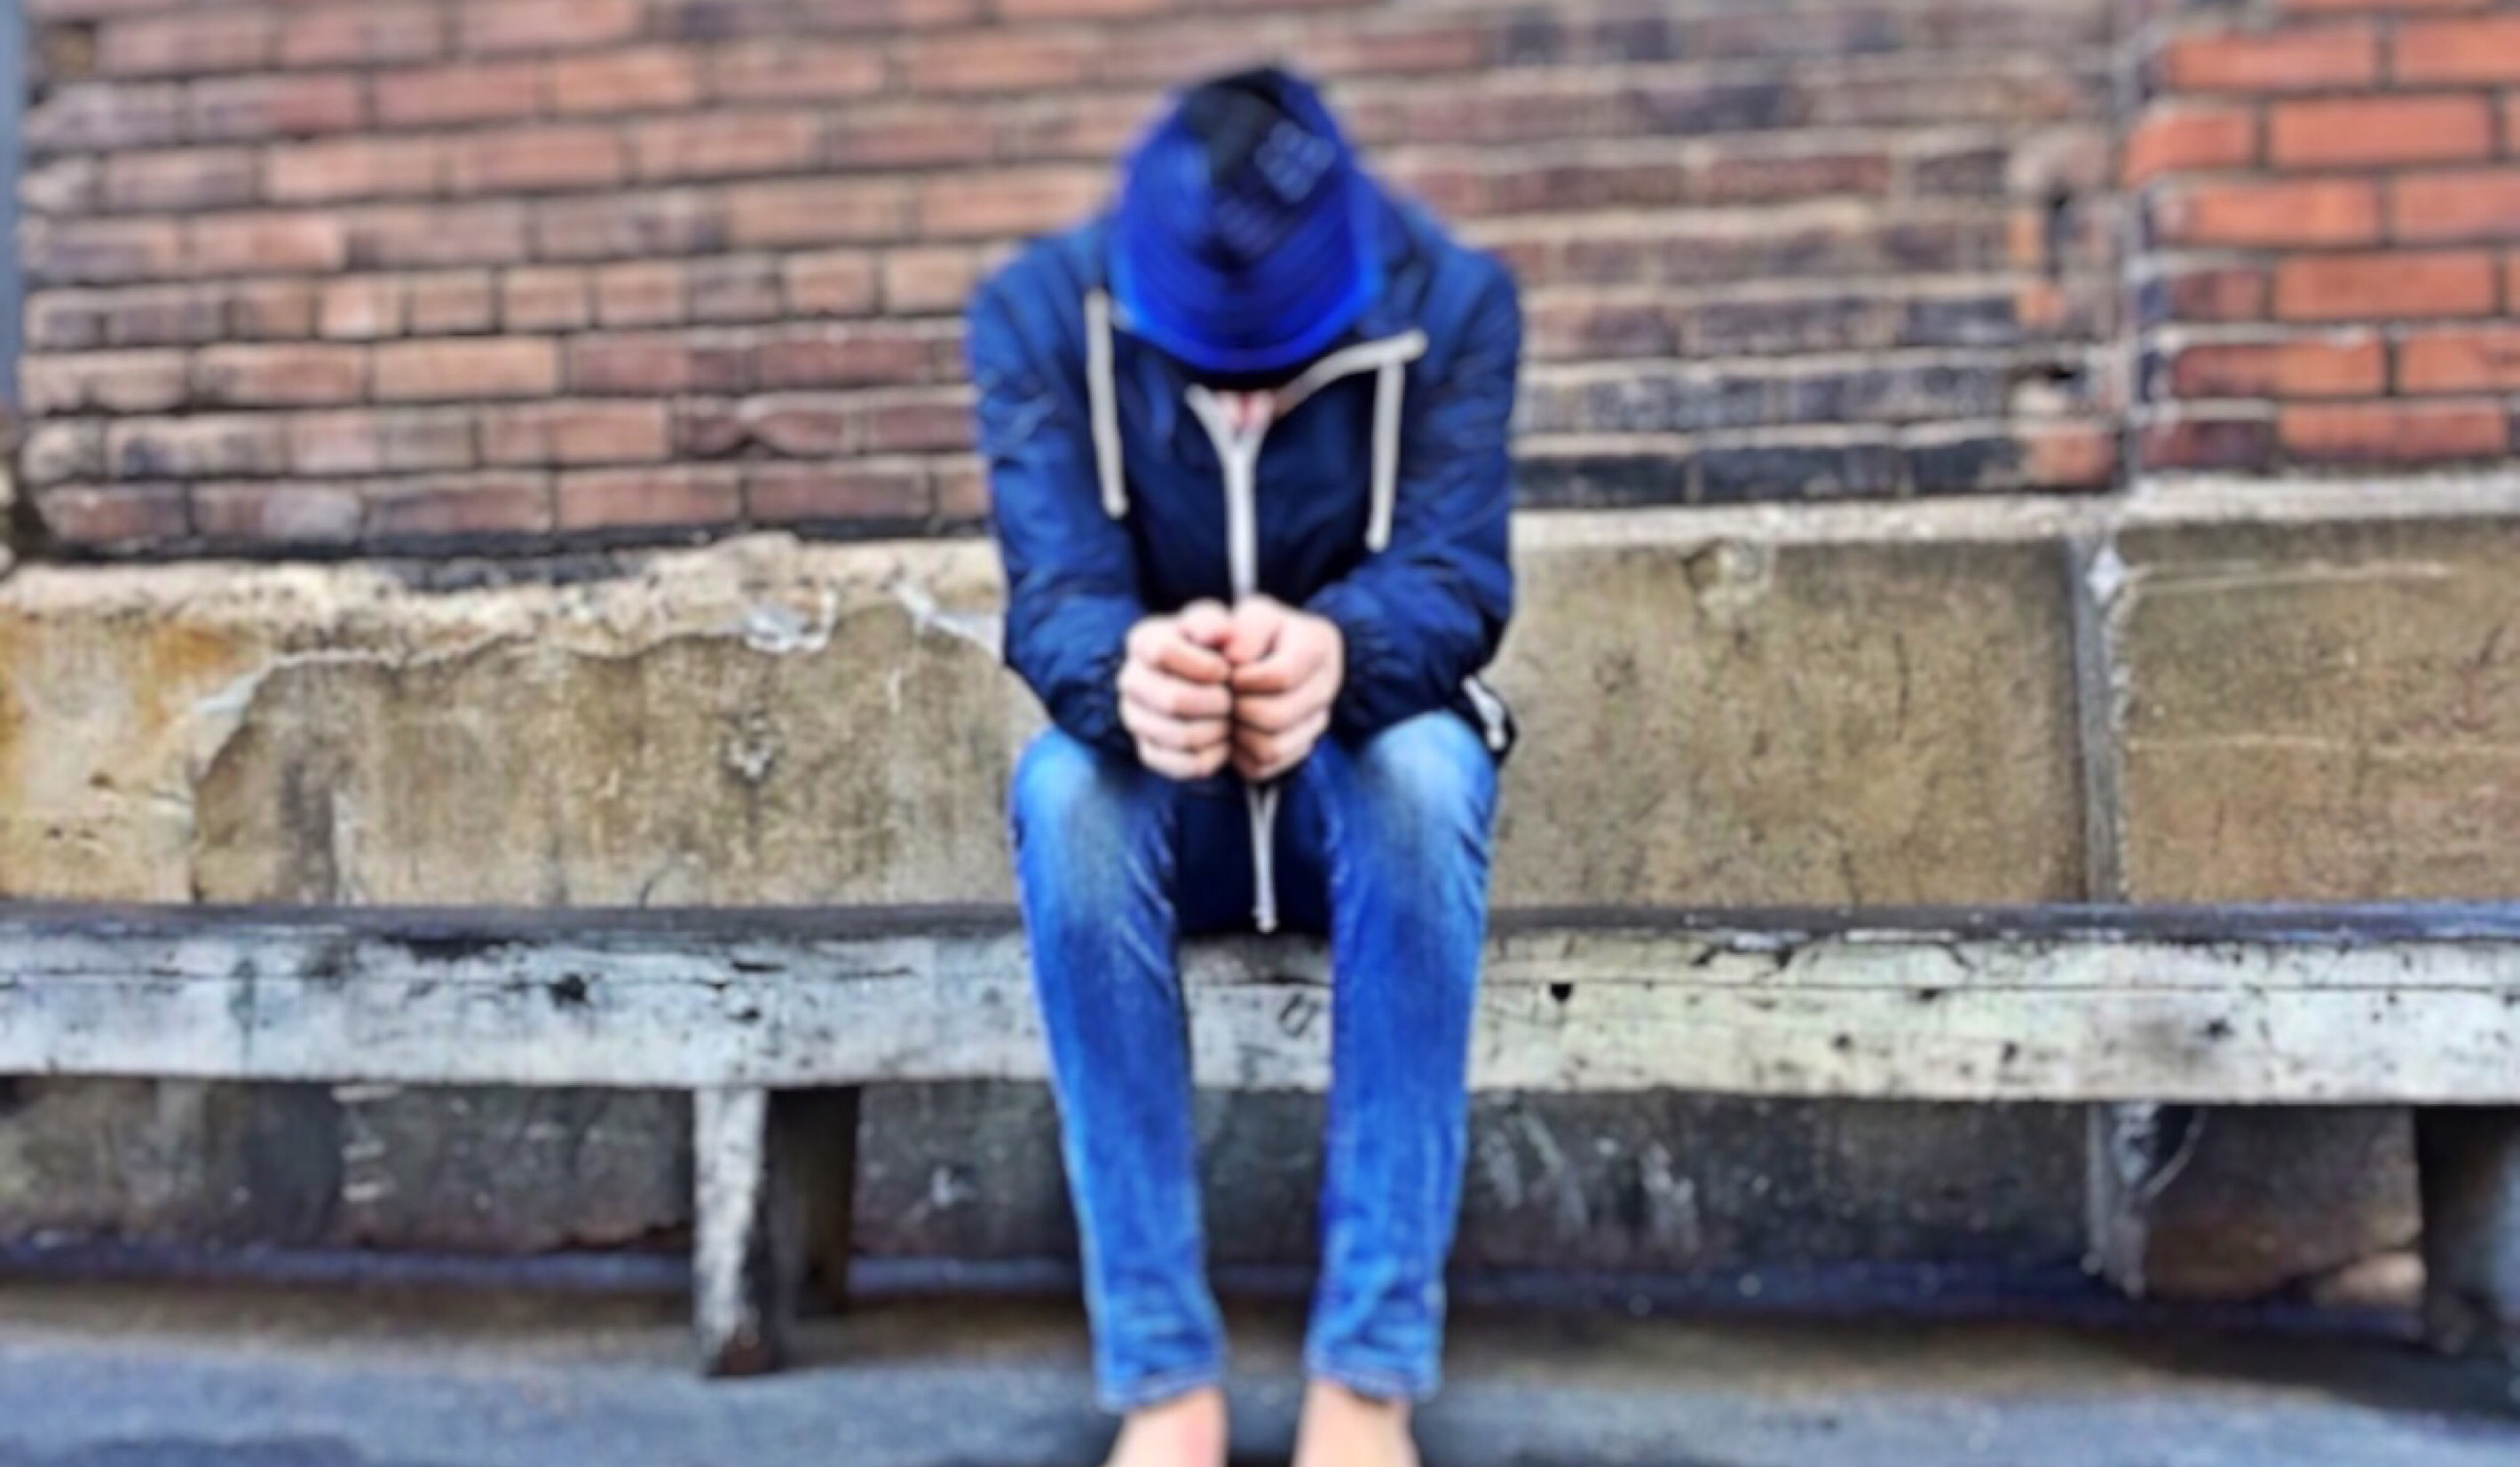 A man in hoody sitting on a bench.